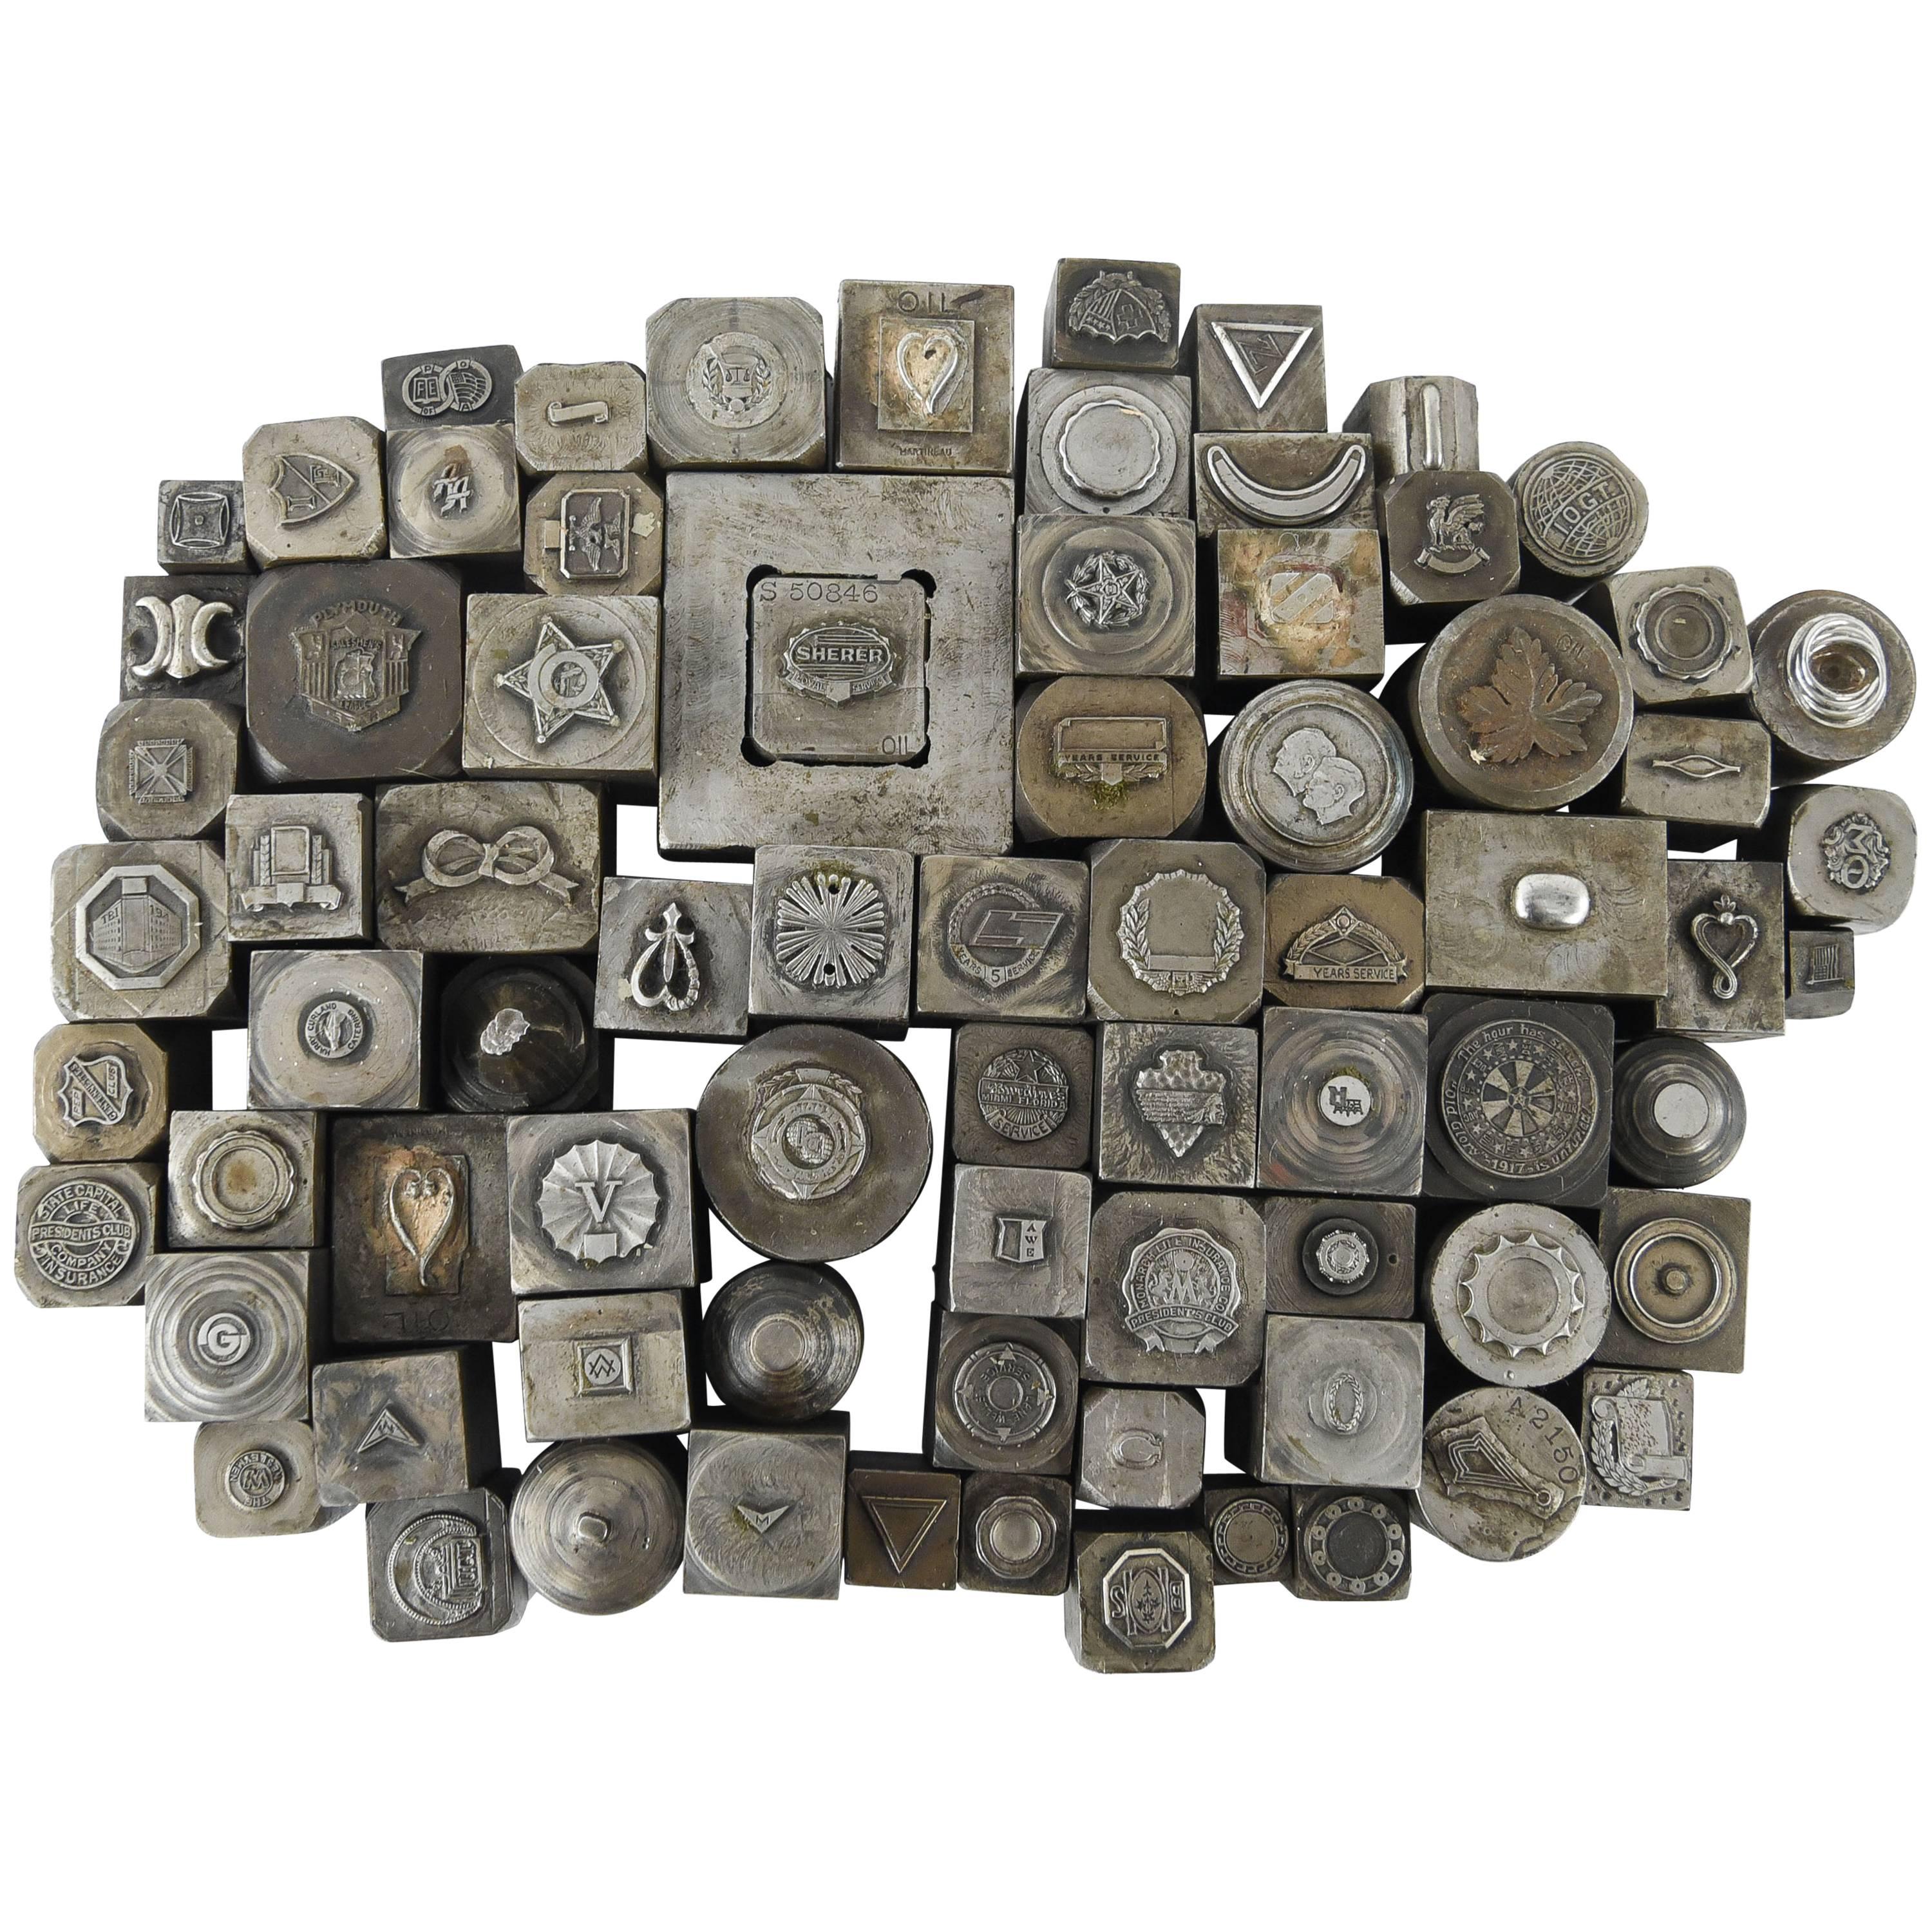 Antique Metal Die Stamp/Seal Collection